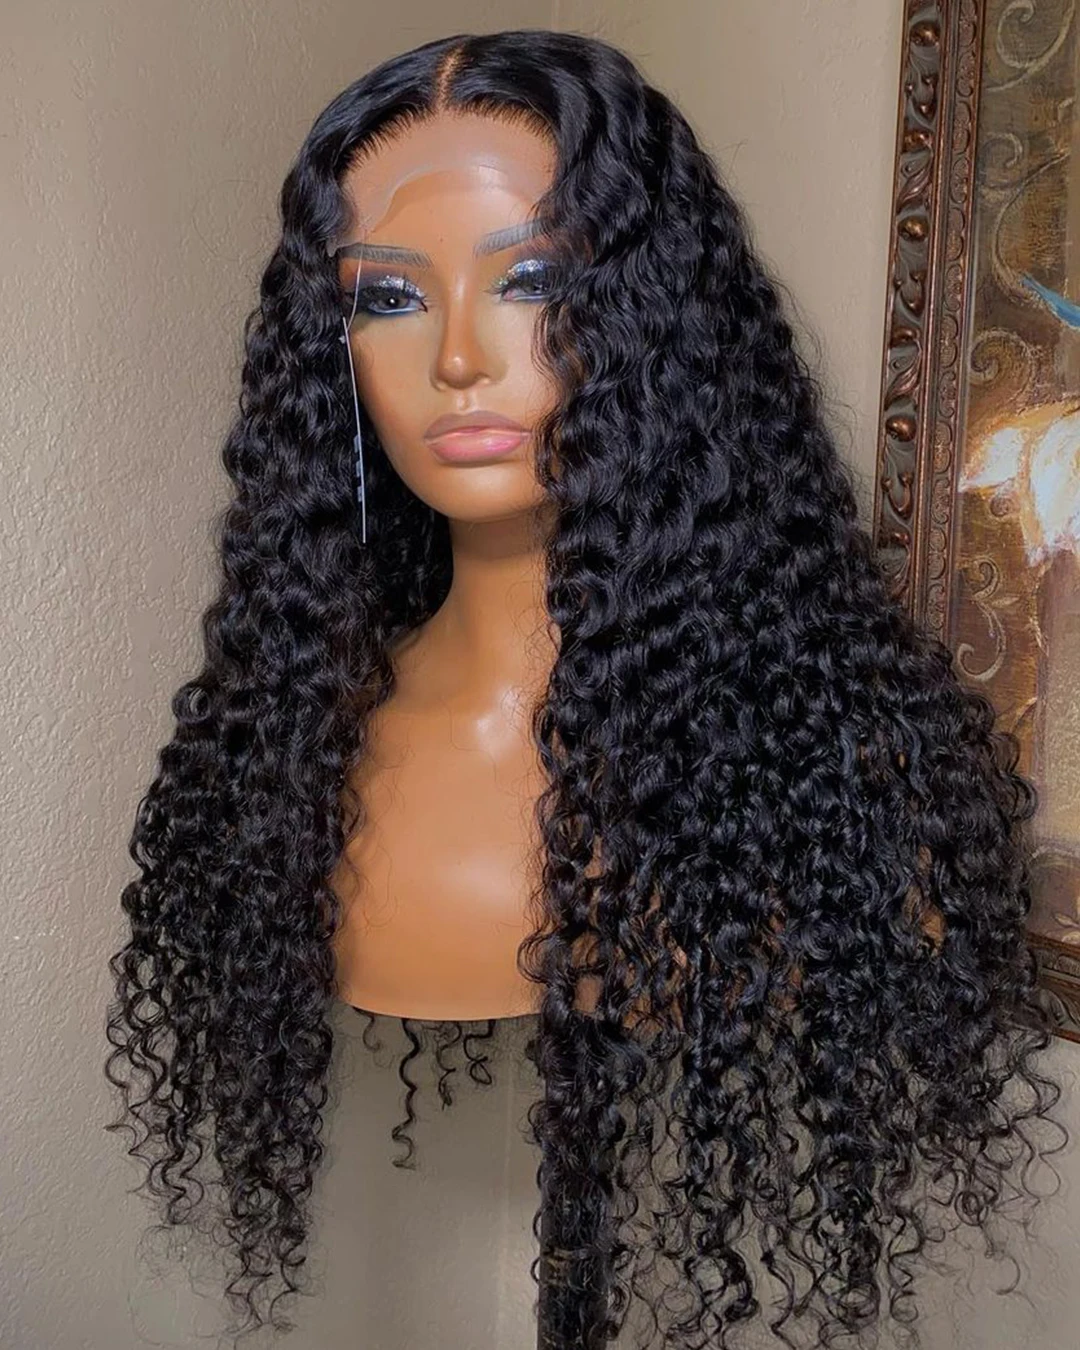 Clearance Sale 13x4/13x6 Water Wave Lace Front Human Hair Wigs For Women Brazilian 4x4 Loose Deep Lace Closure Wig Glueless Hair image_0